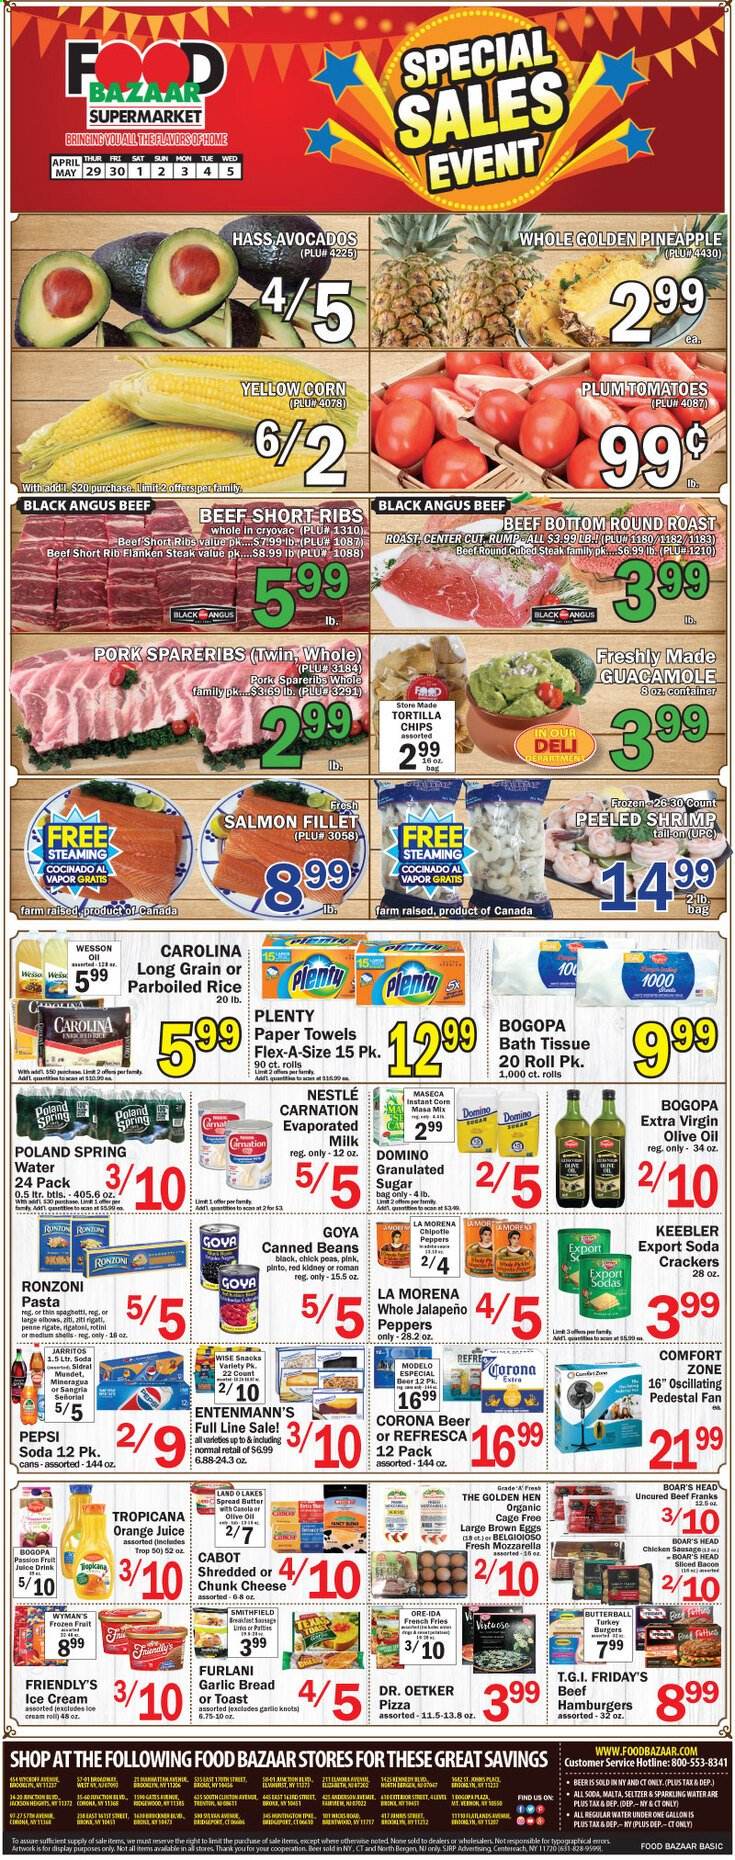 thumbnail - Food Bazaar Flyer - 04/29/2021 - 05/05/2021 - Sales products - bread, Entenmann's, beans, corn, jalapeño, salmon, salmon fillet, spaghetti, pizza, hamburger, pasta, Butterball, guacamole, Dr. Oetker, chunk cheese, evaporated milk, eggs, cage free eggs, ice cream, Friendly's Ice Cream, potato fries, french fries, Ore-Ida, Nestlé, snack, crackers, Keebler, tortilla chips, granulated sugar, sugar, Goya, rice, parboiled rice, penne, extra virgin olive oil, olive oil, oil, Pepsi, soda, juice, seltzer water, spring water, sparkling water, Ron Pelicano, beer, Corona Extra, beef meat, beef ribs, steak, round roast, turkey burger, pork spare ribs, pineapple. Page 1.